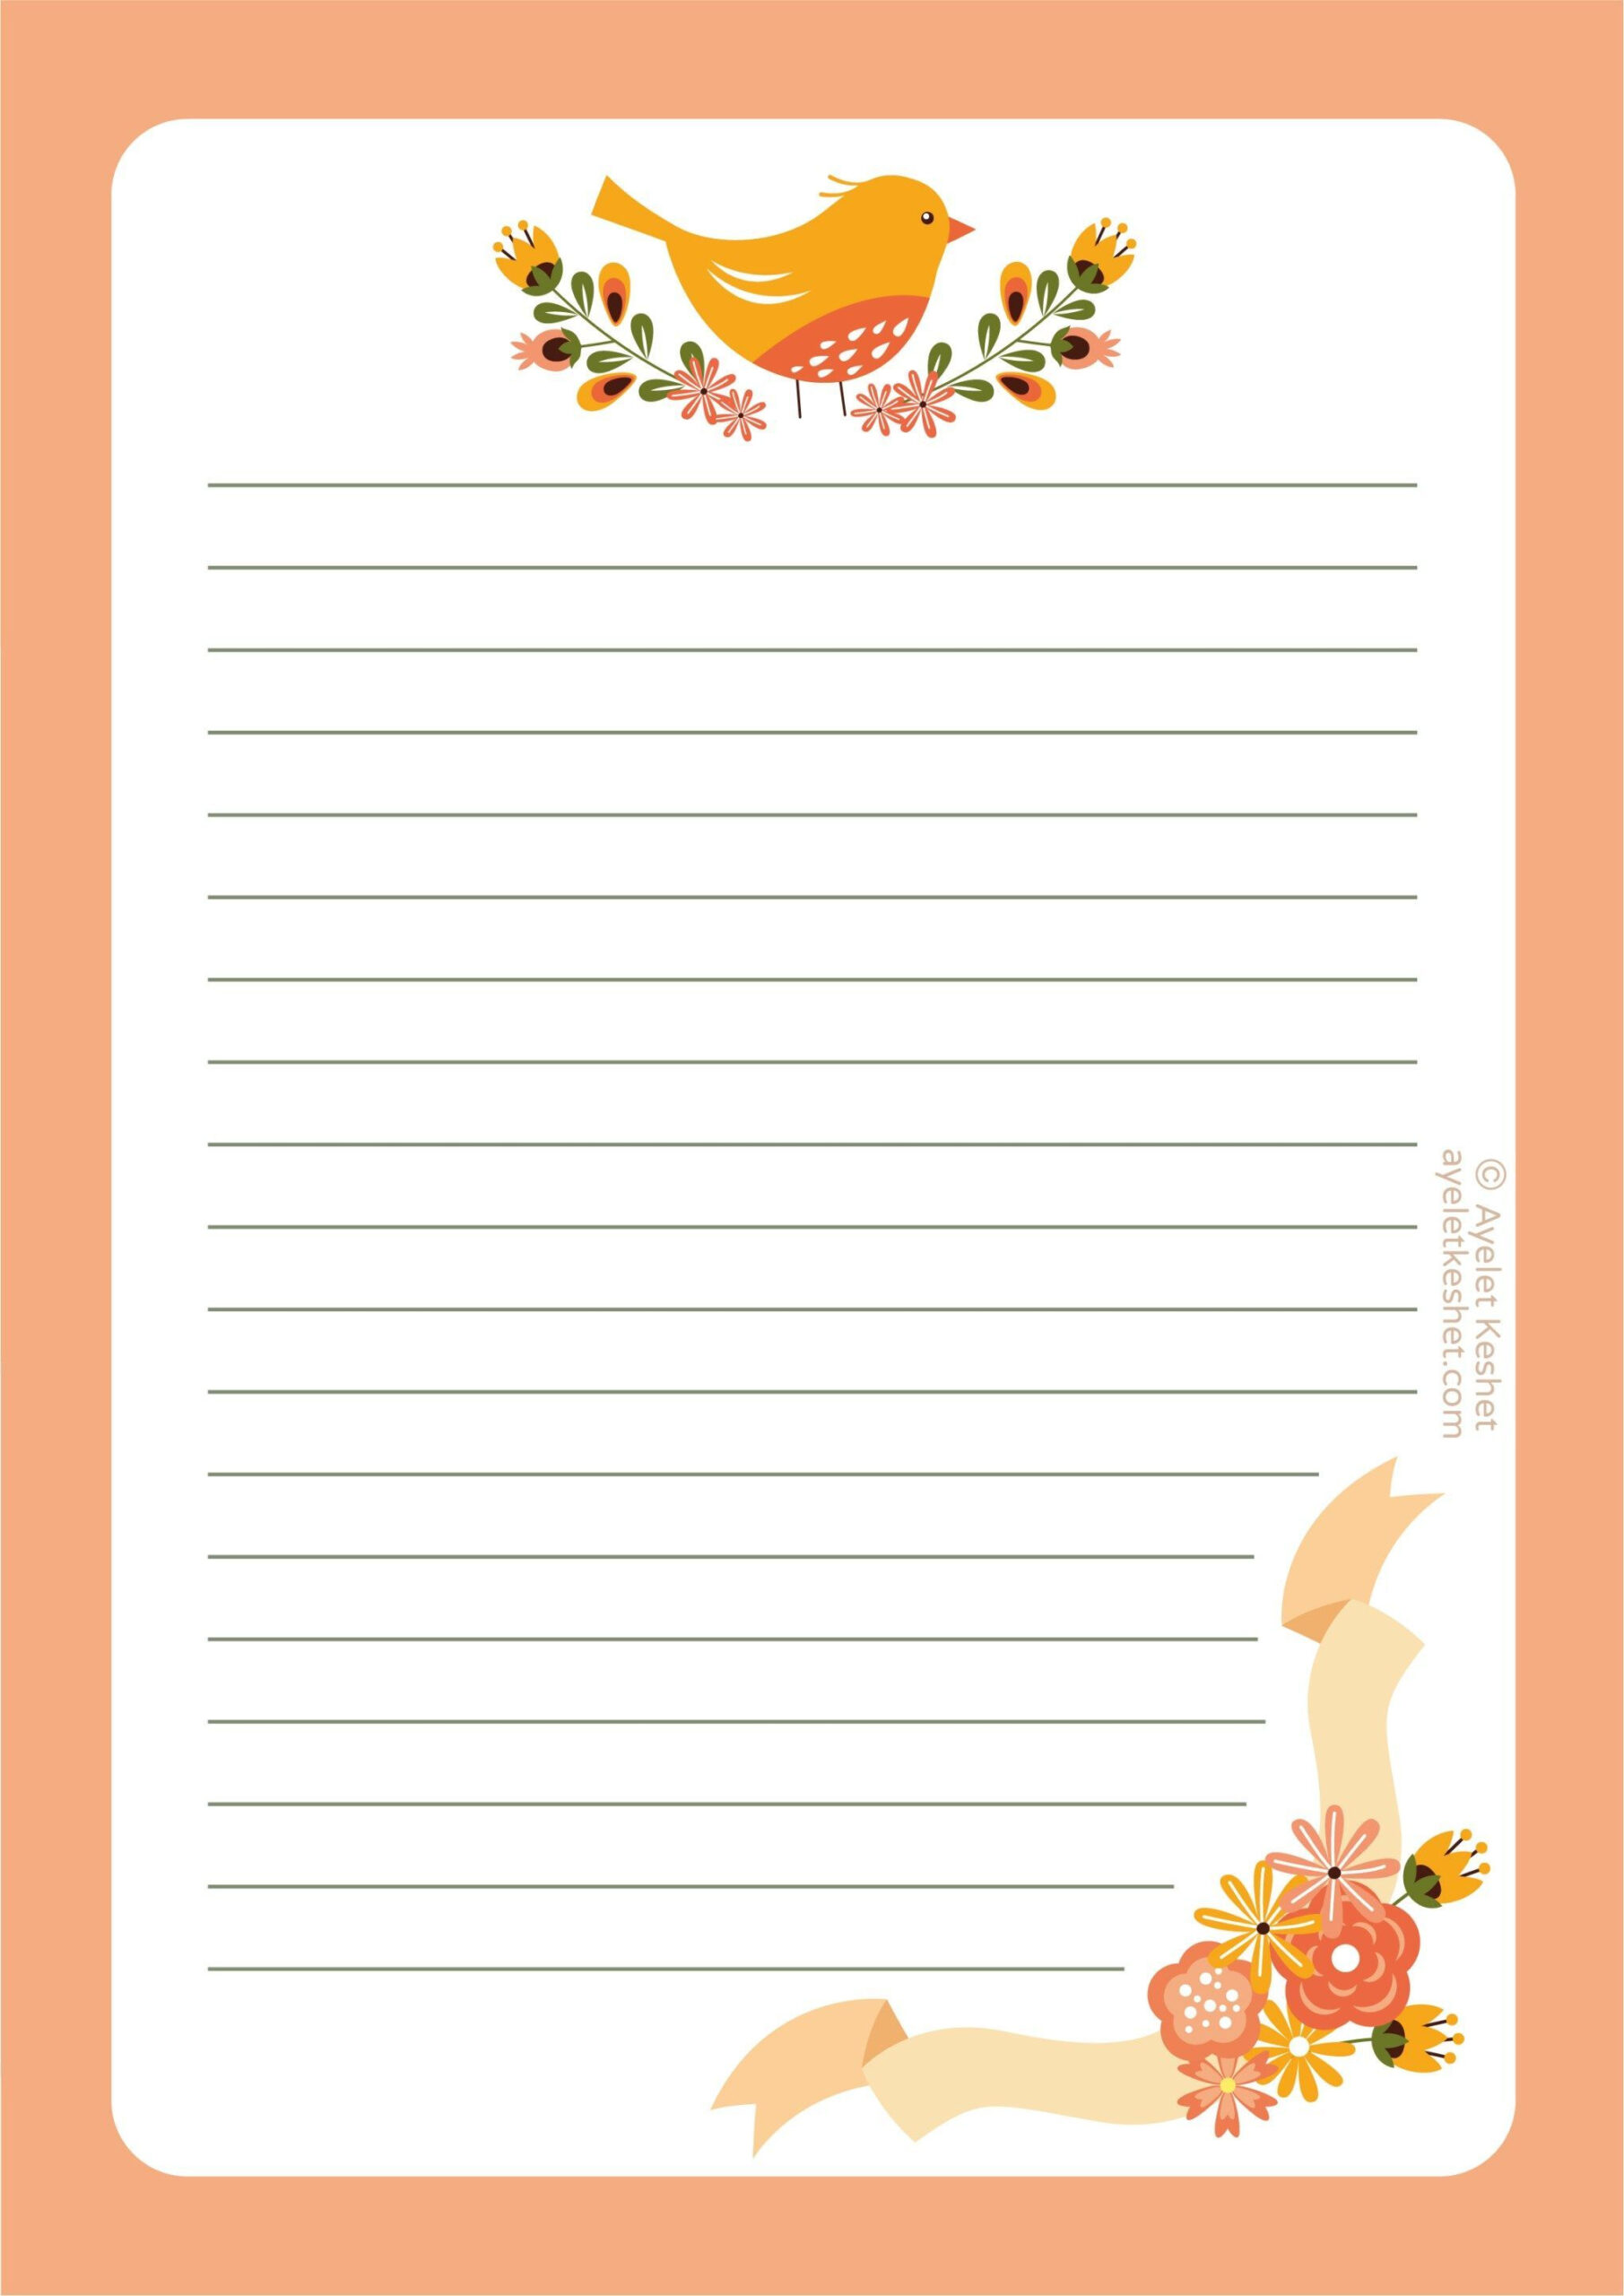 Free Printable Writing Paper Letter Paper stationery With Cute An 